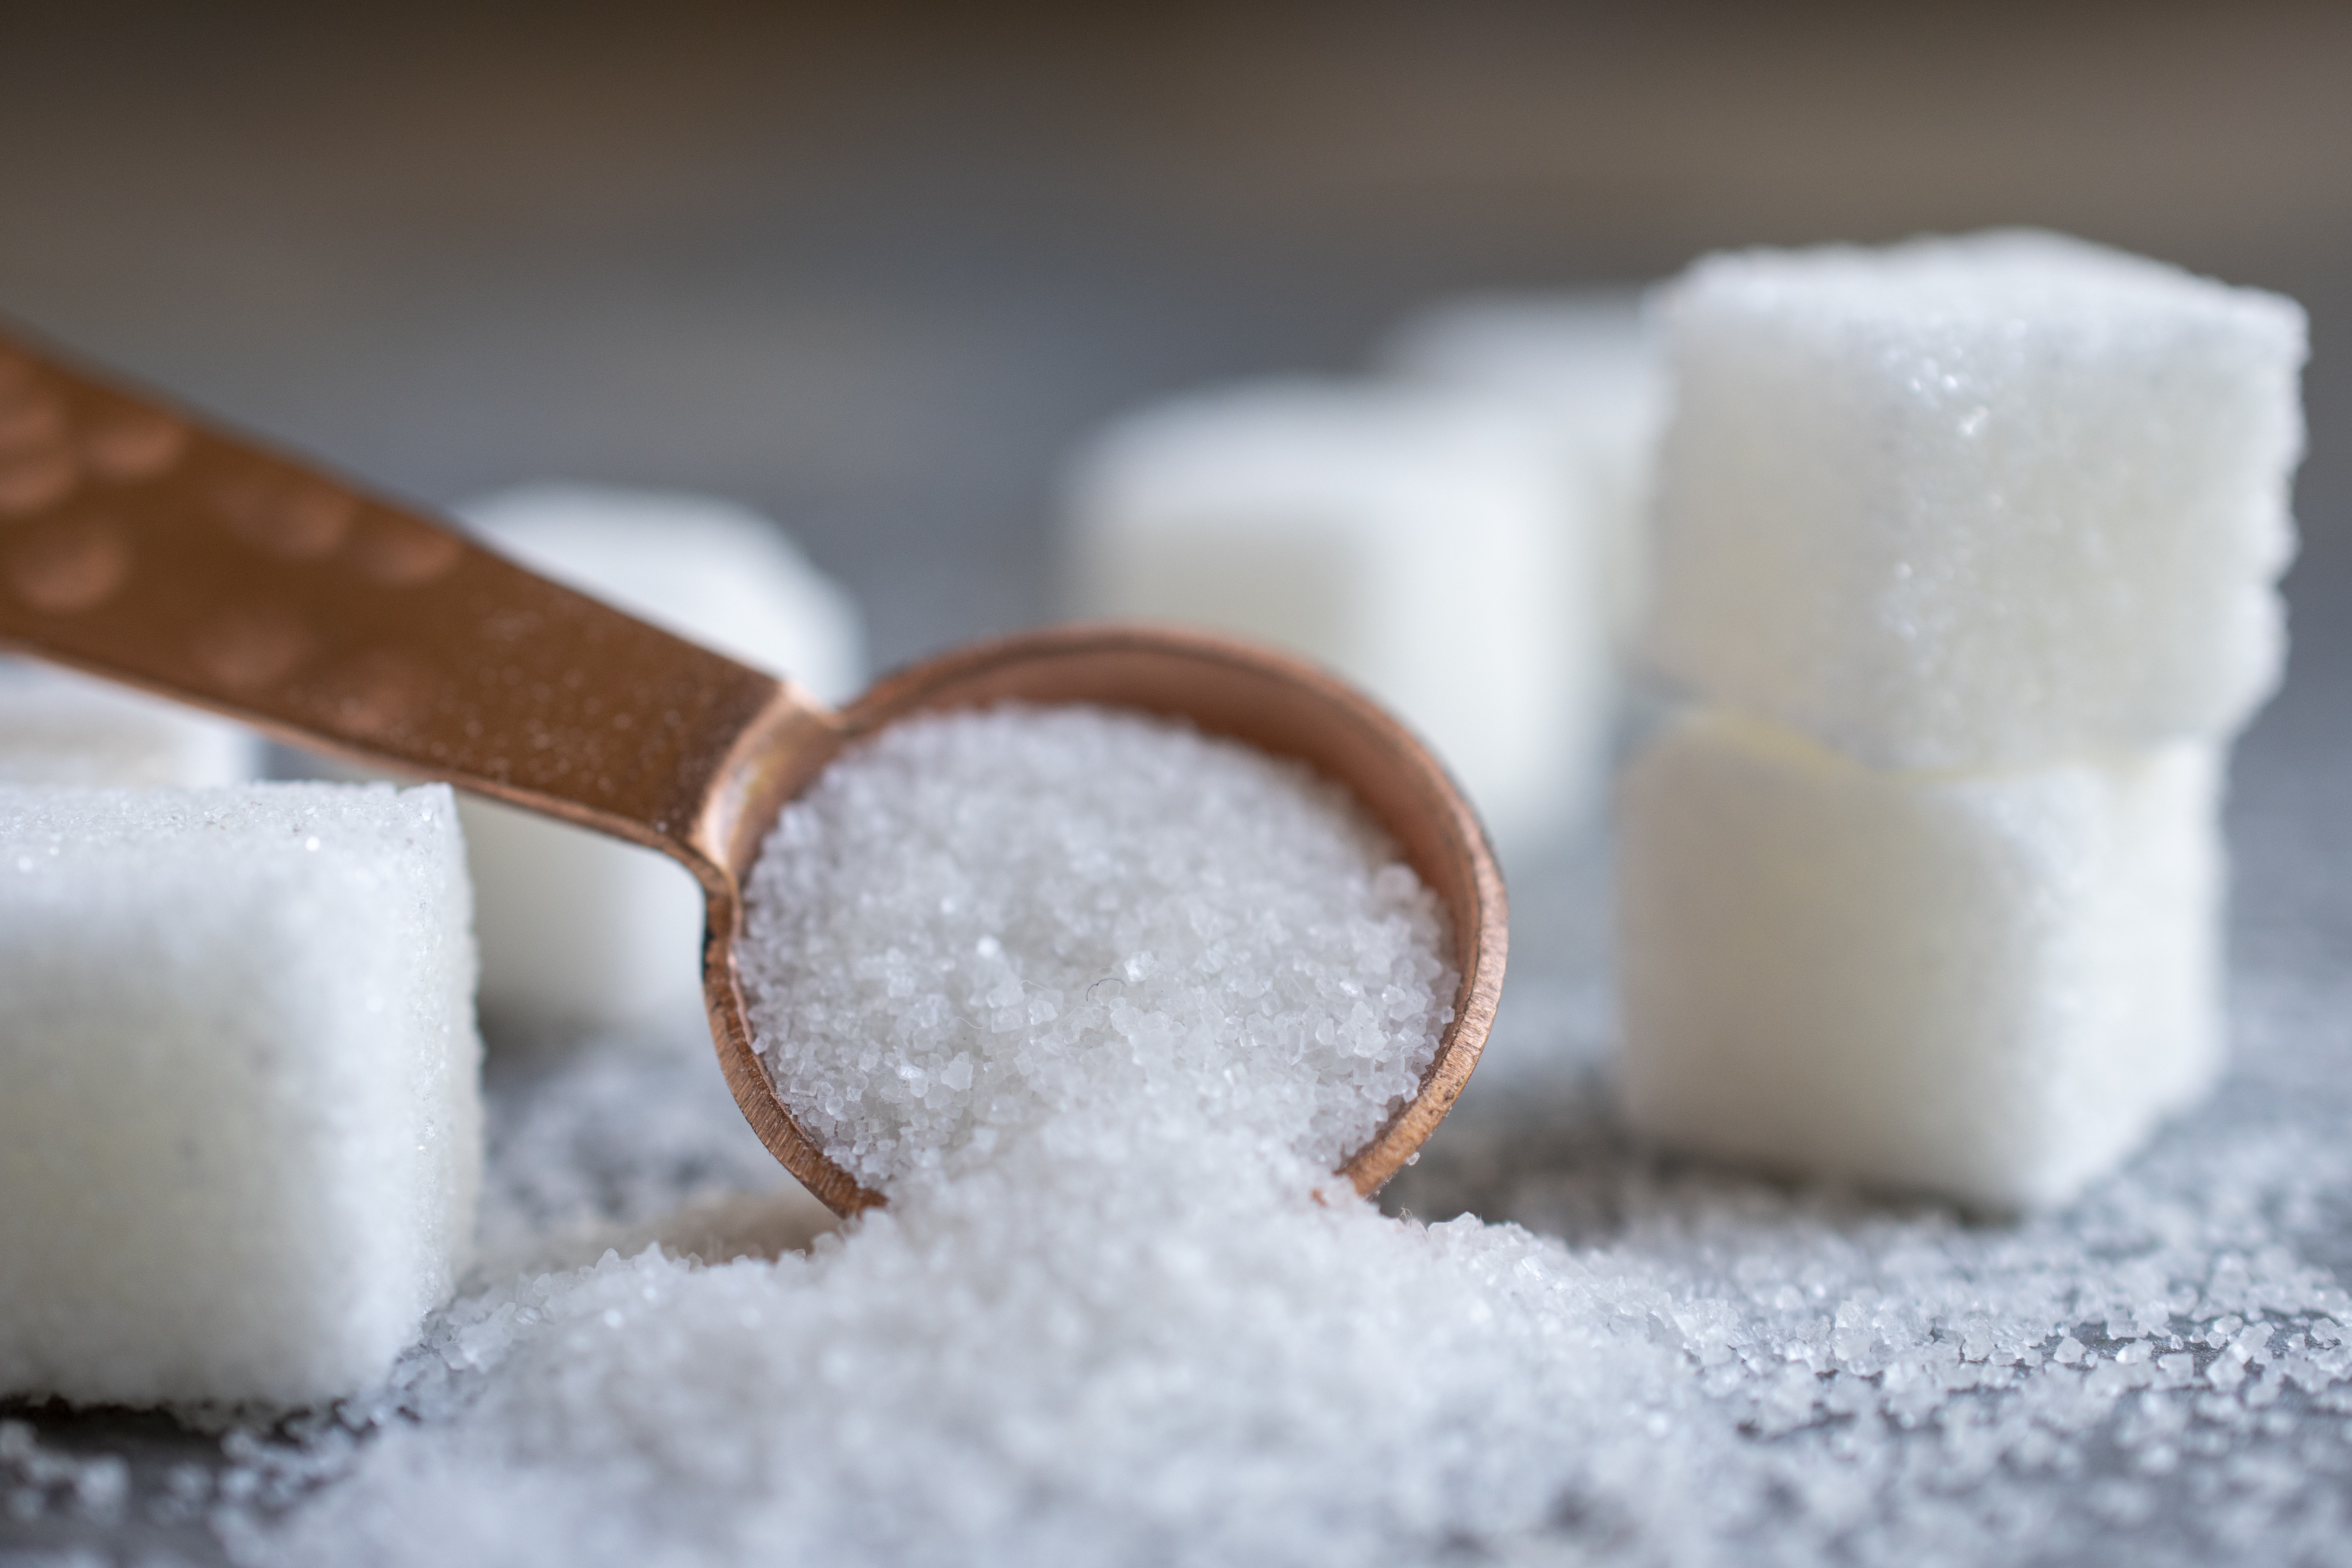 A spoonful of Sugar with sugar cubes